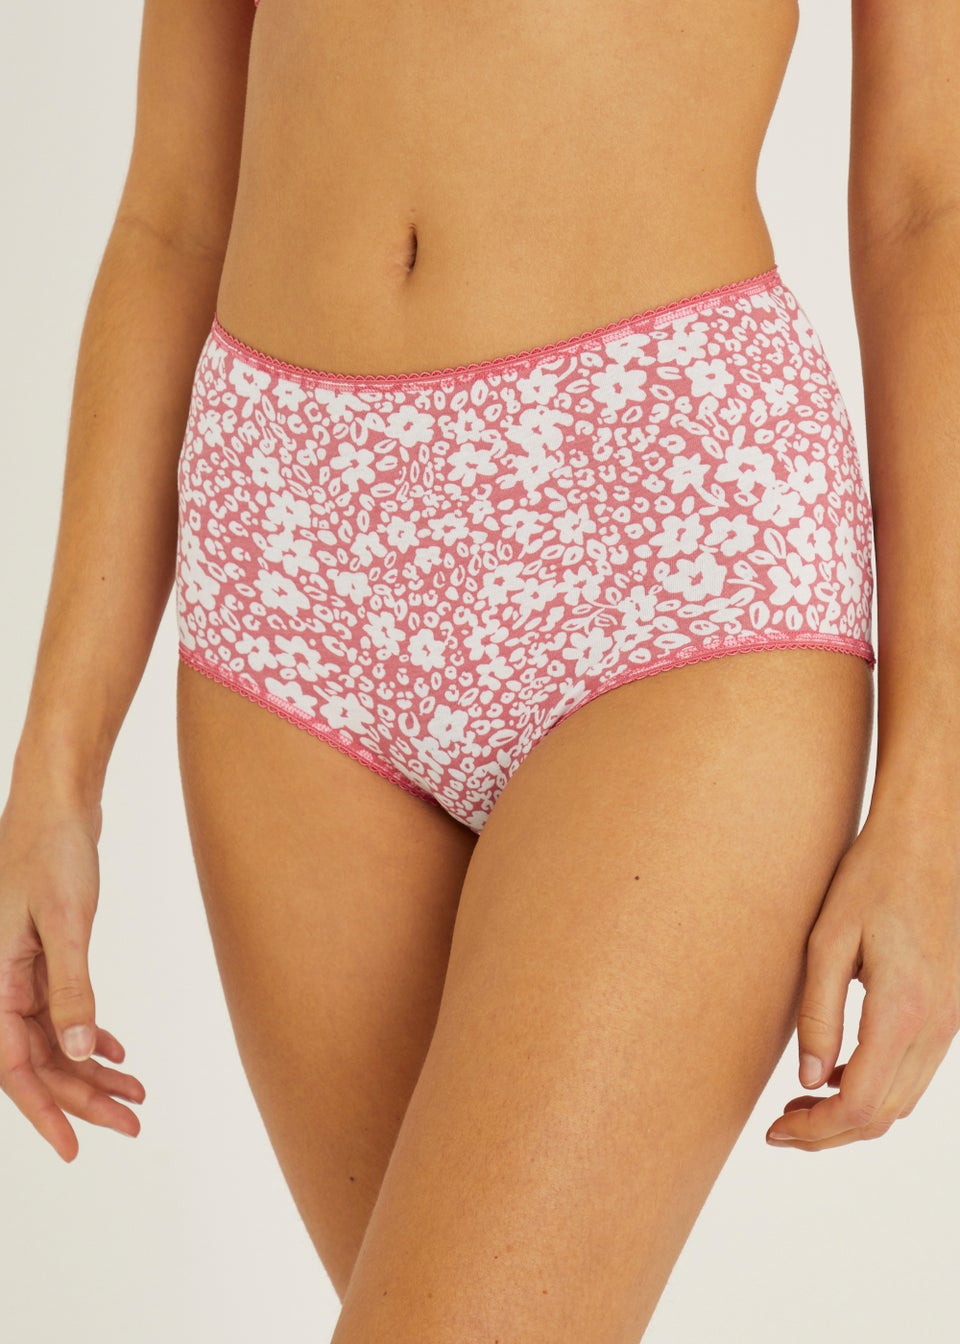 5 Pack Plain & Floral Print Full Knickers